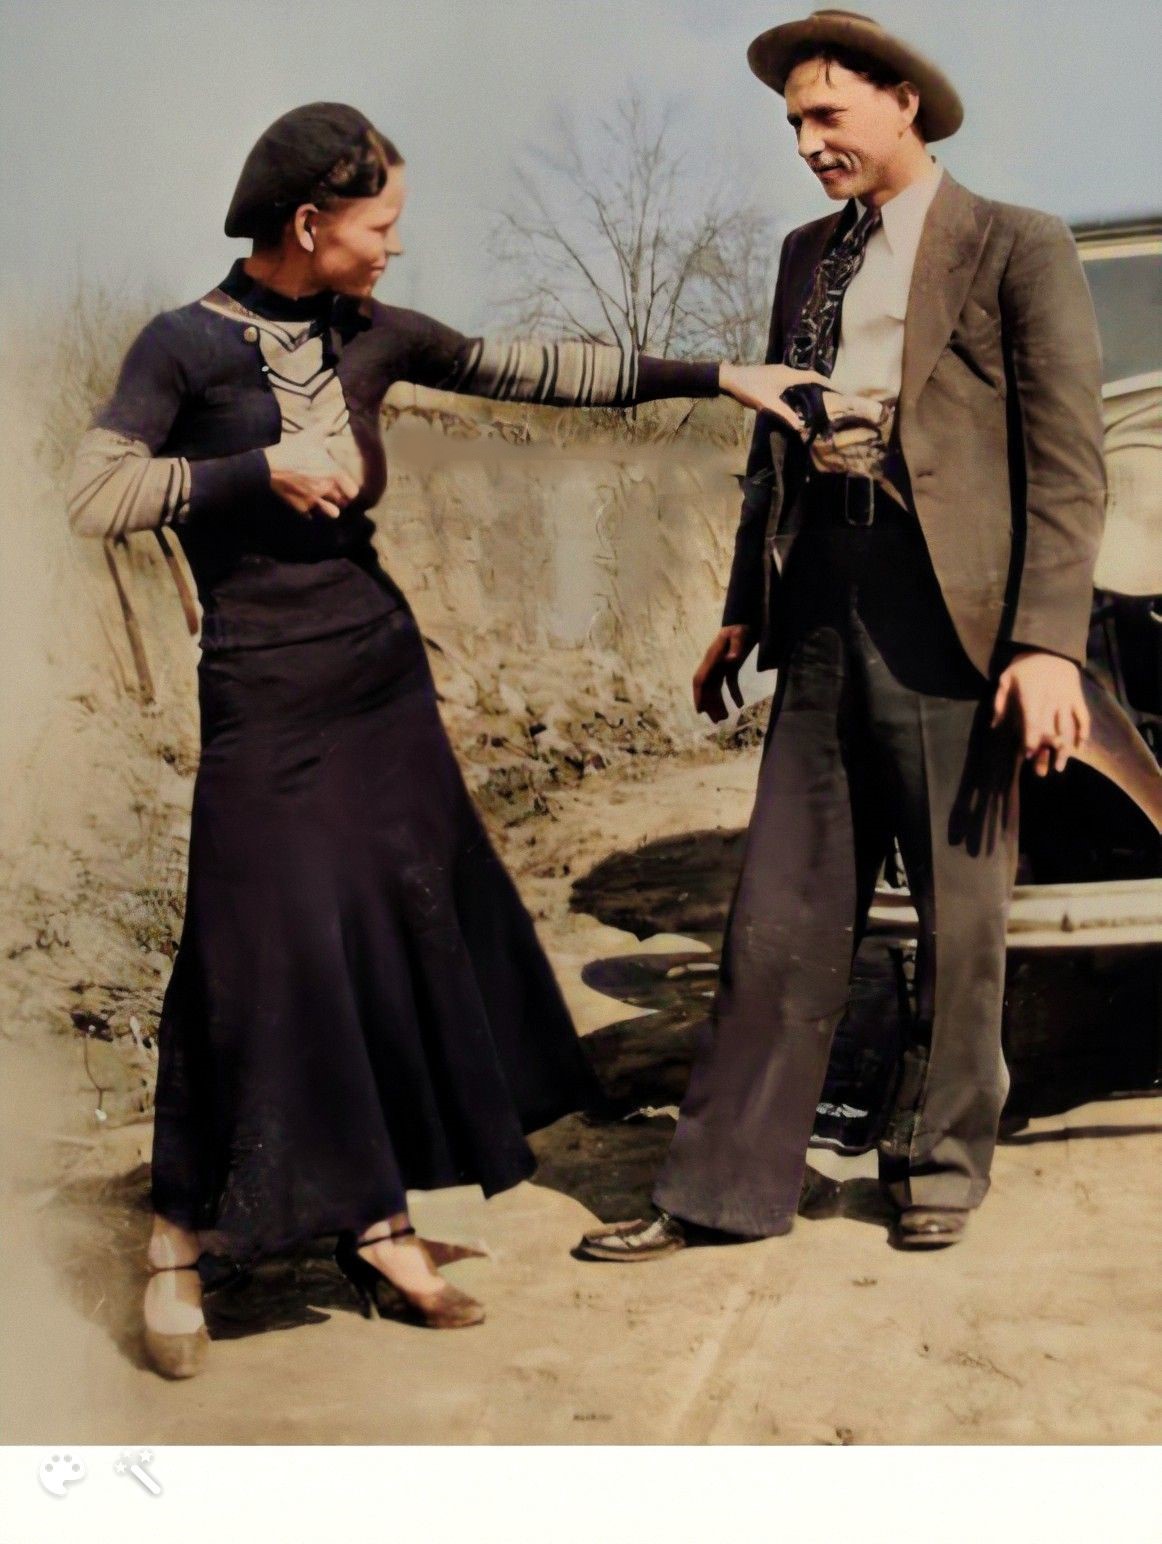 Vintage photos of Bonnie and Clyde